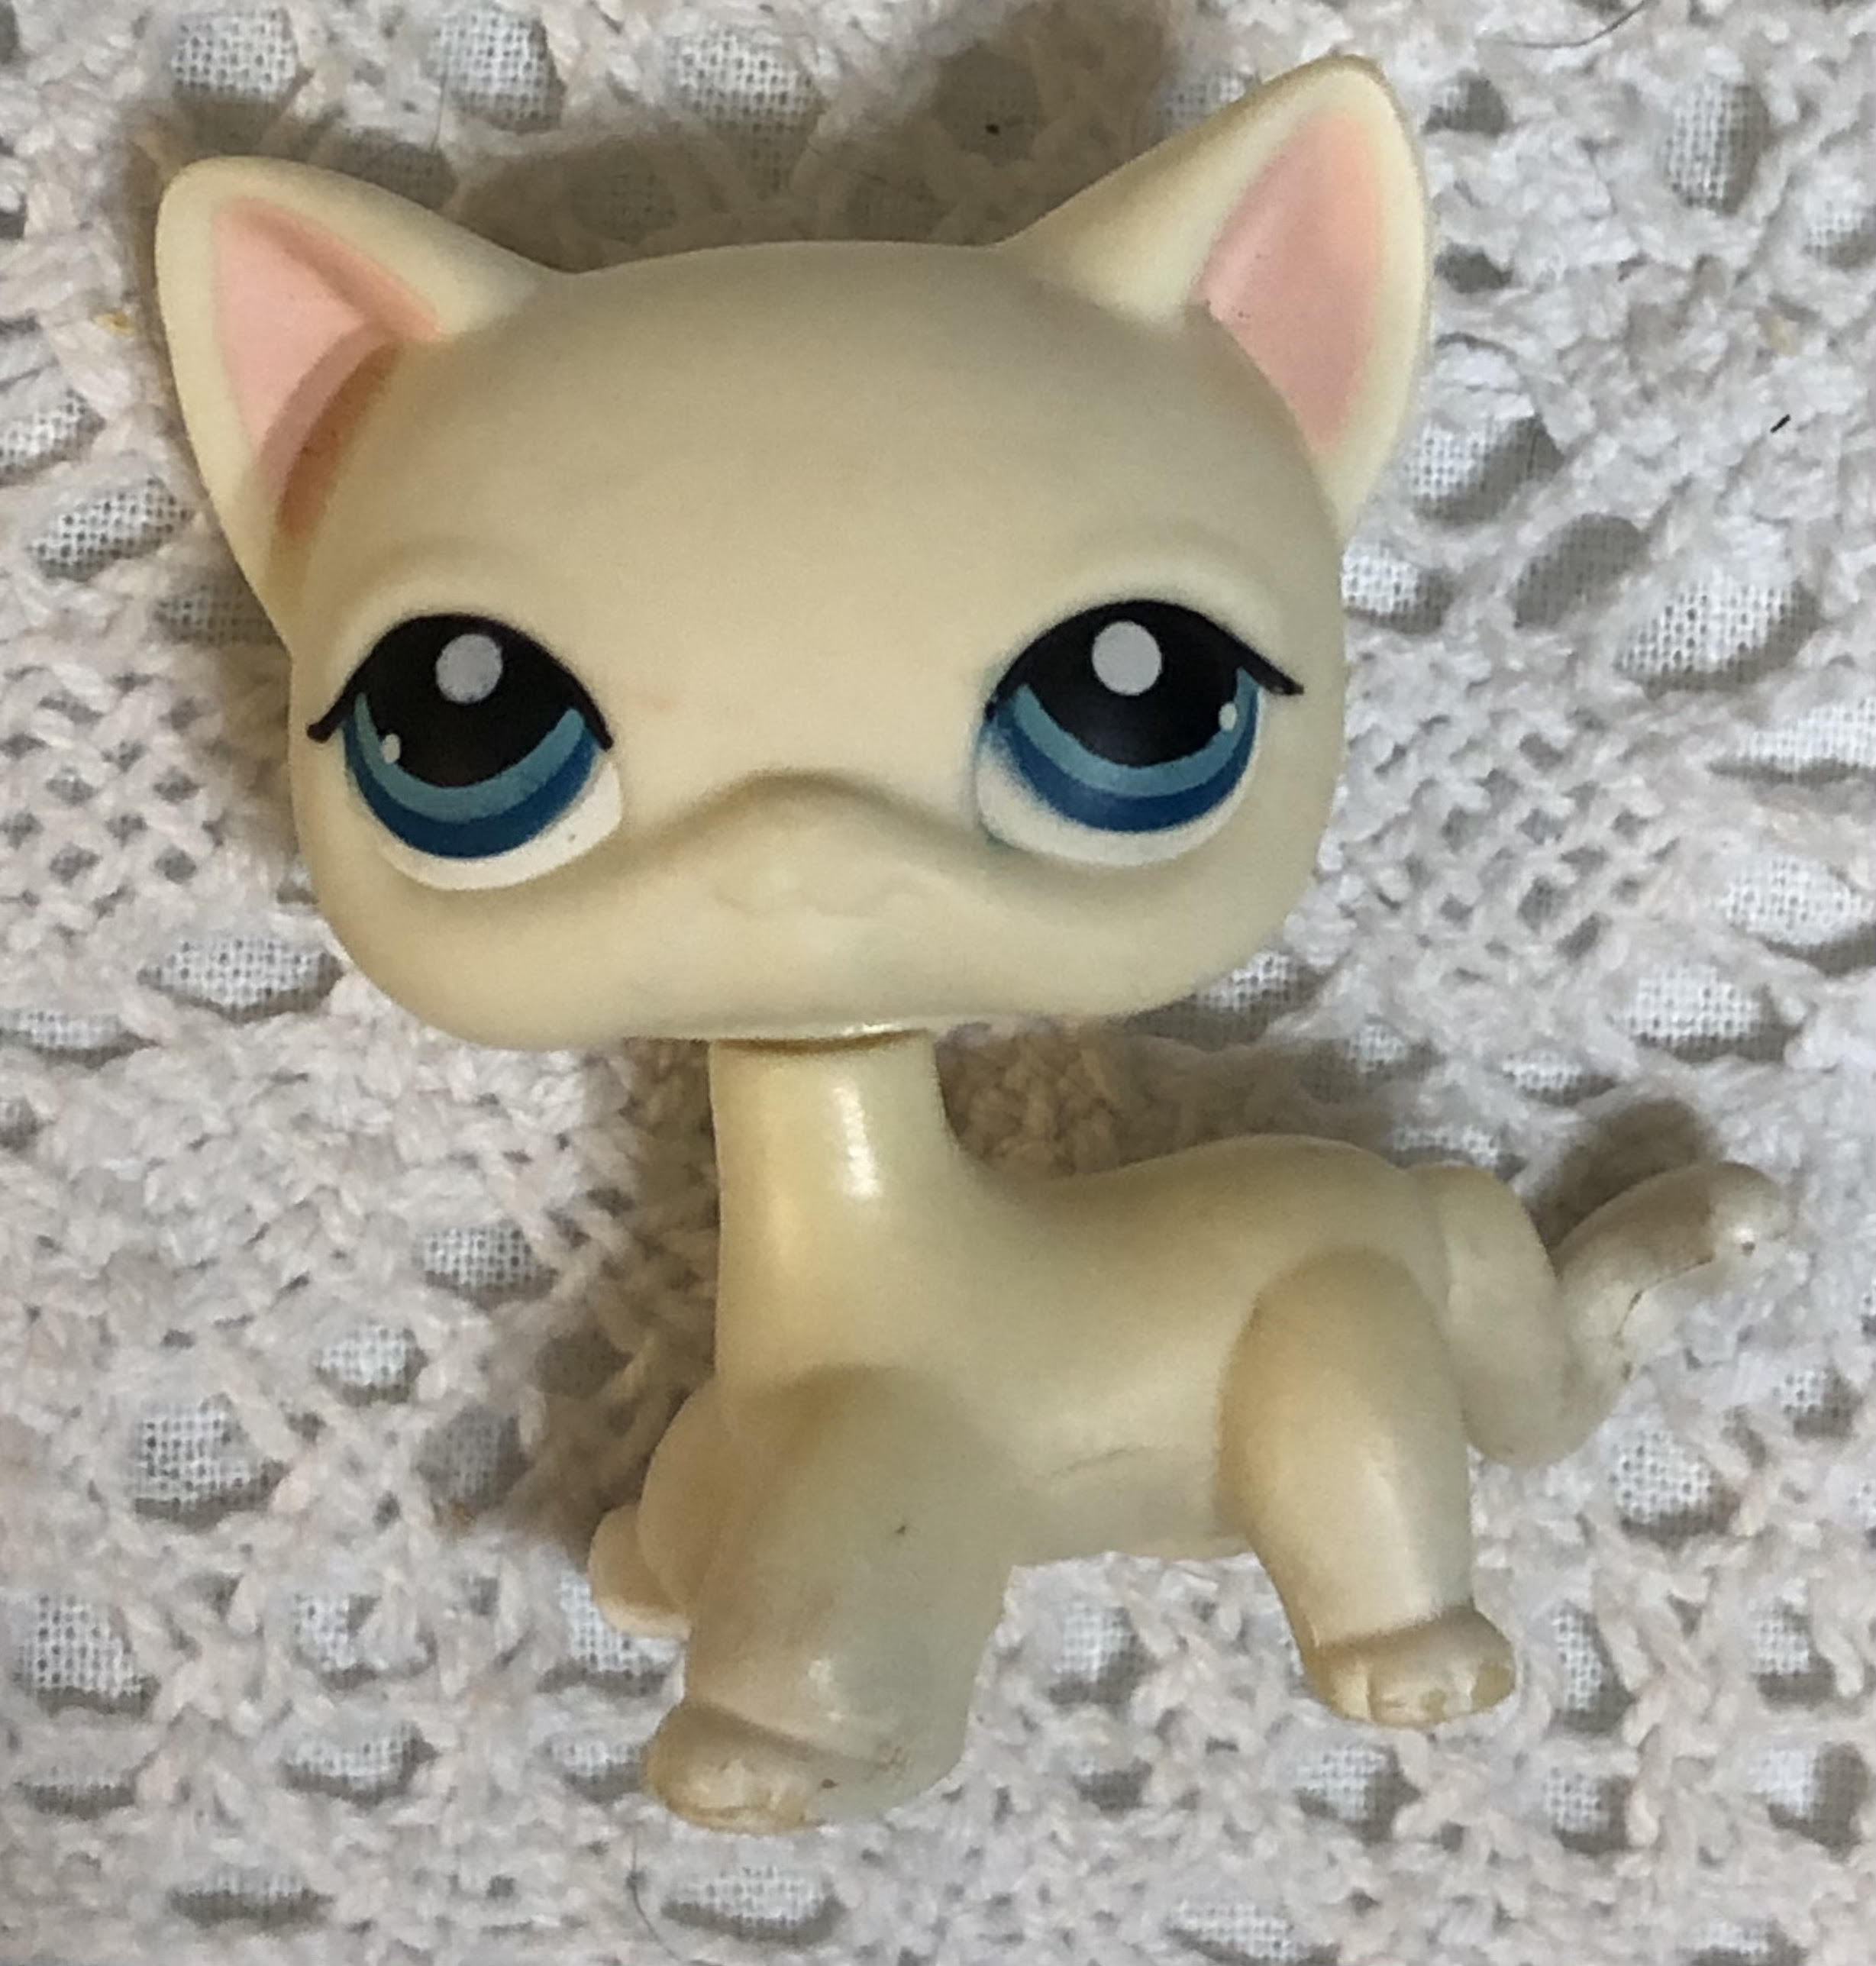 https://static.wikia.nocookie.net/the-littlest-pet-shop-wikia/images/b/b6/-410.jpg/revision/latest?cb=20201202010322